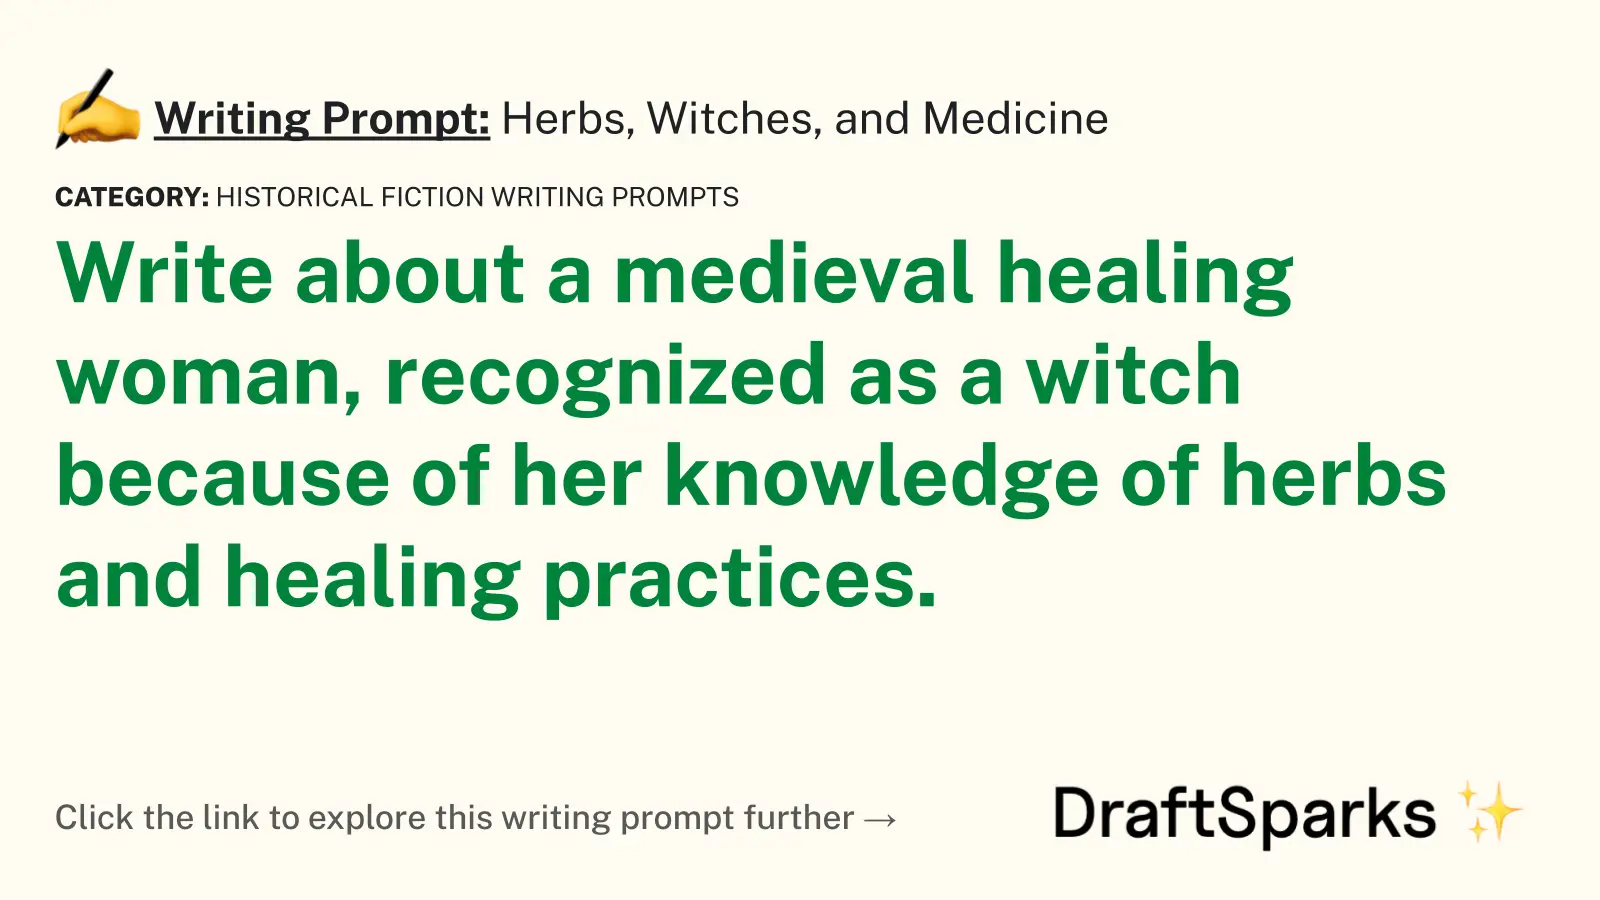 Herbs, Witches, and Medicine